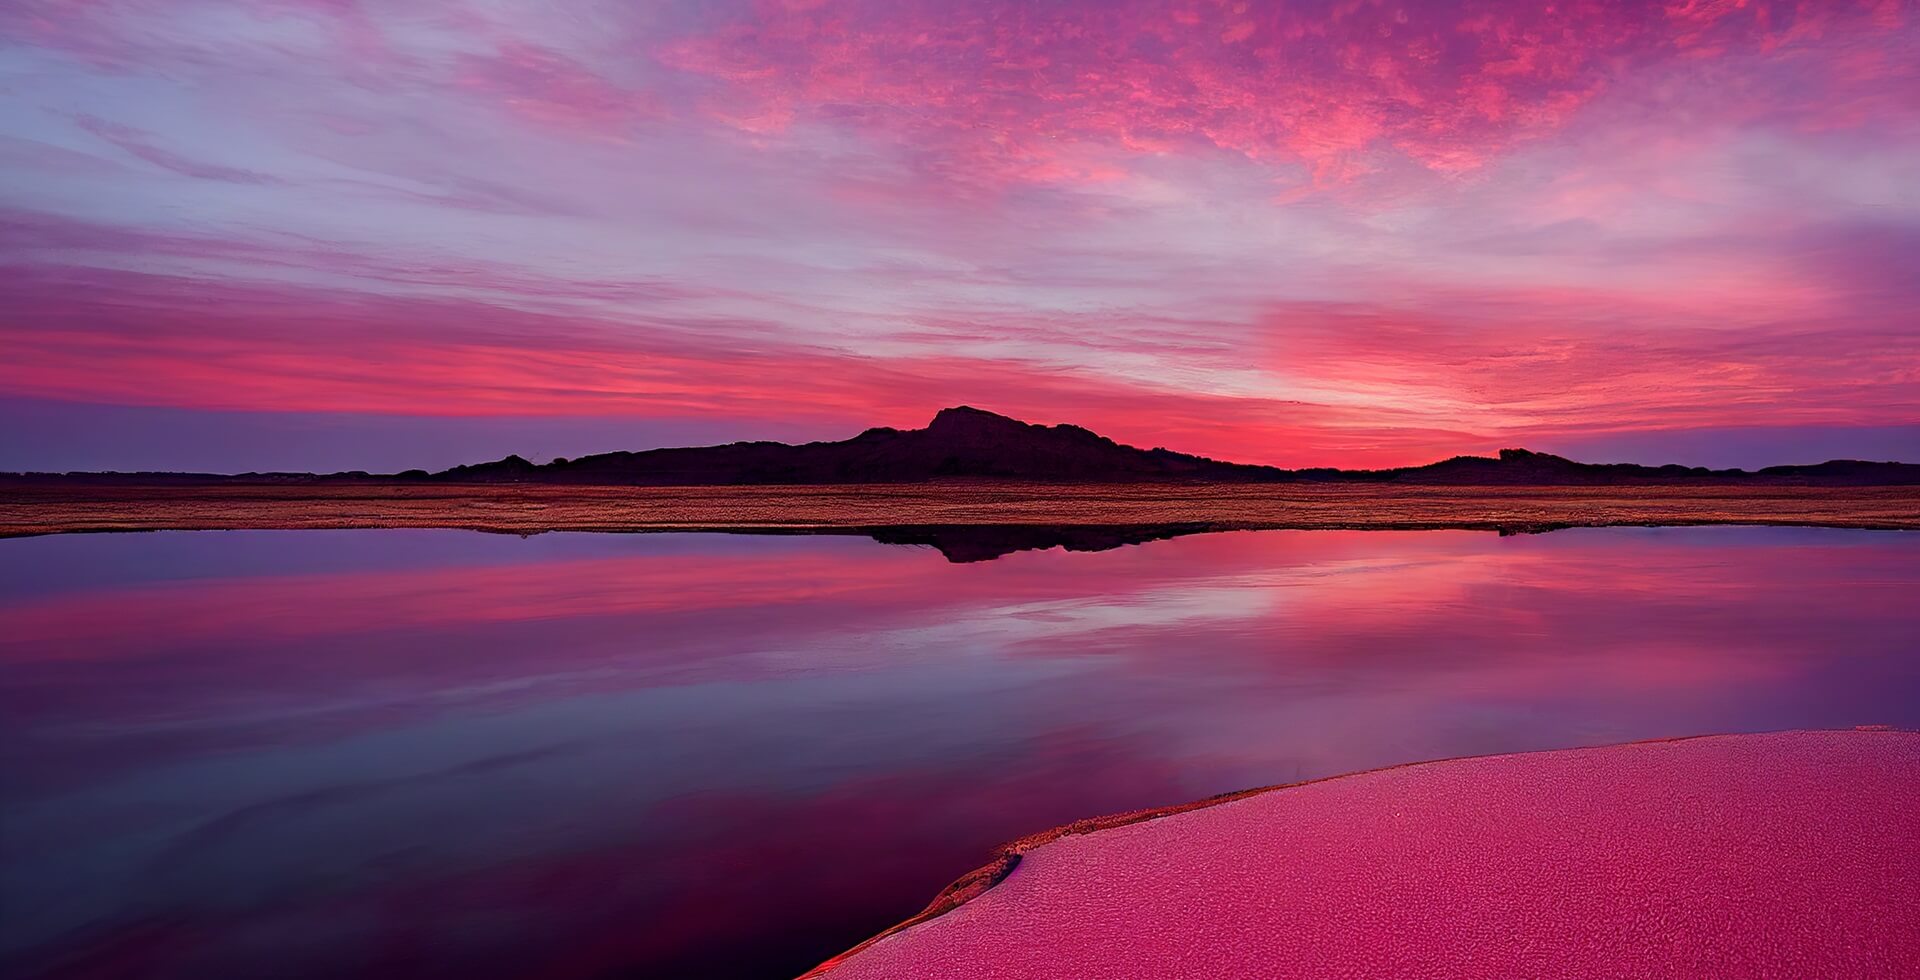 Footer Pink lake, the incredible natural landscape at sunset. The salt lake turned pink. Vivid red Salt deposits on the shores of the beautiful pink lake